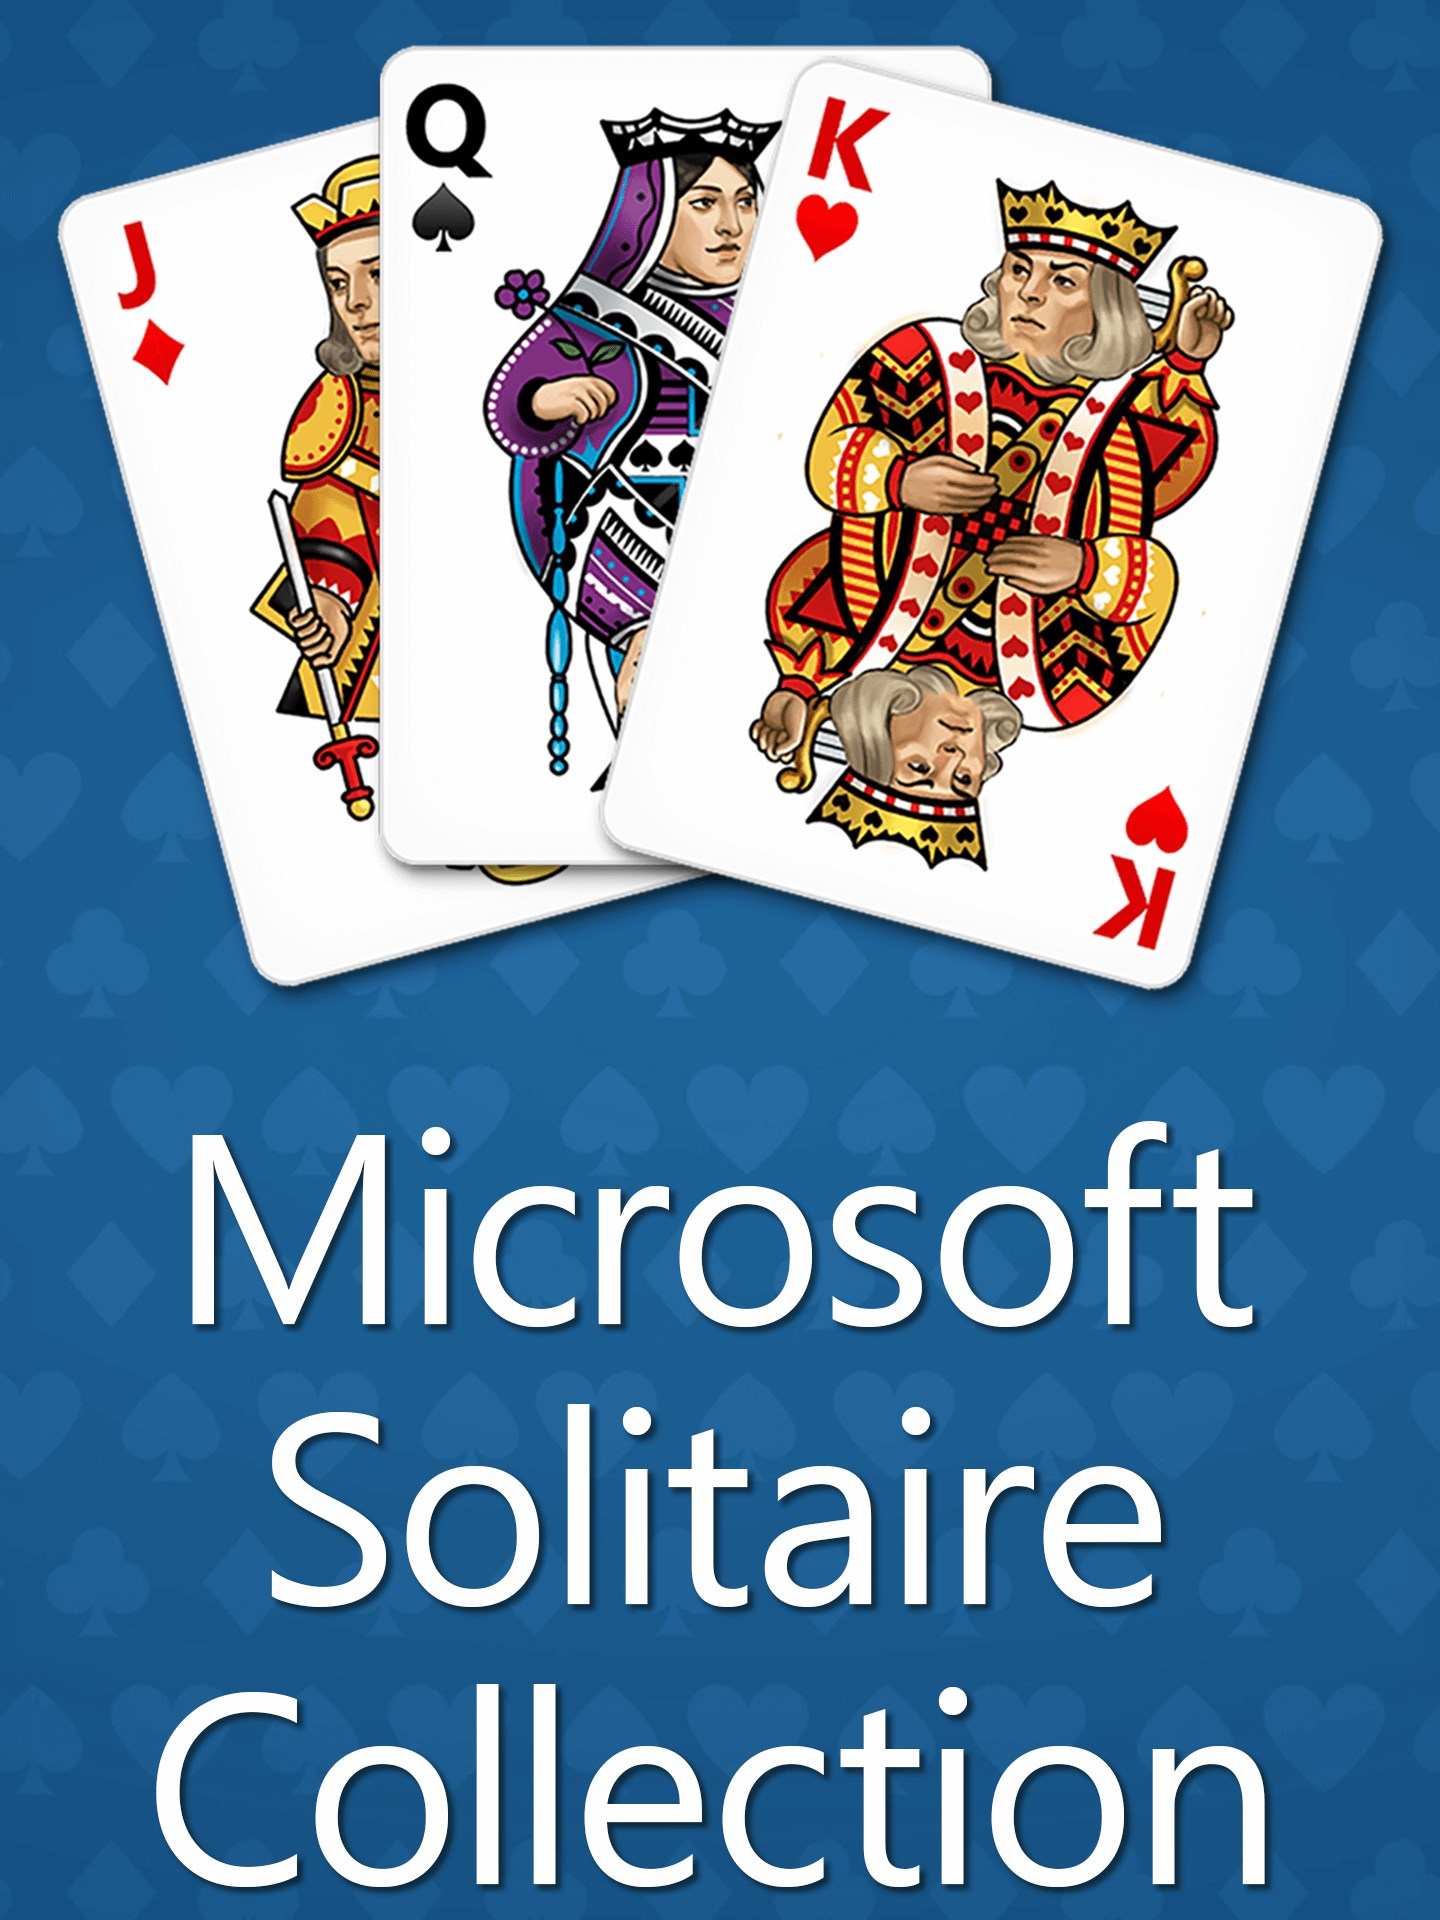 Windows 10 solitaire collection. Игры Microsoft Solitaire collection. Microsoft Солитер коллекция. Солитер коллекшн. Пасьянс Microsoft Solitaire collection.